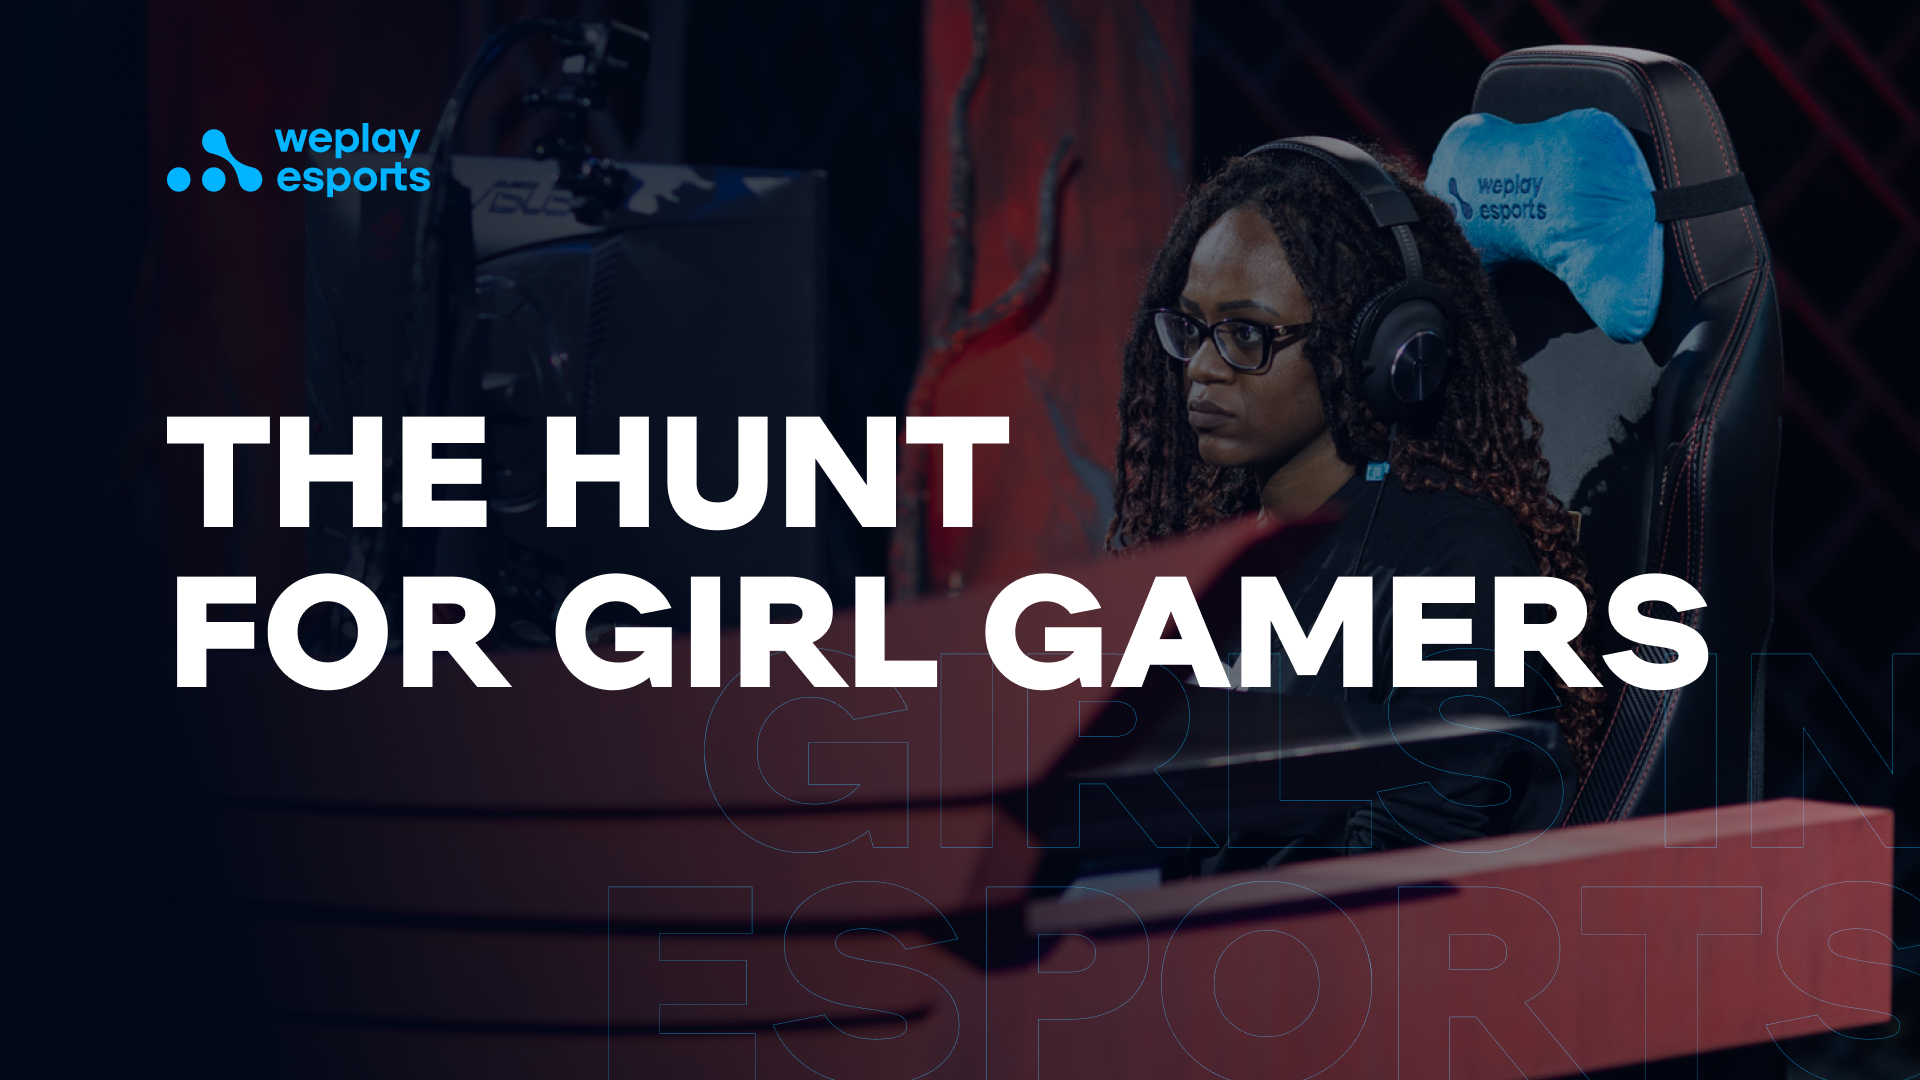 The hunt for girl gamers